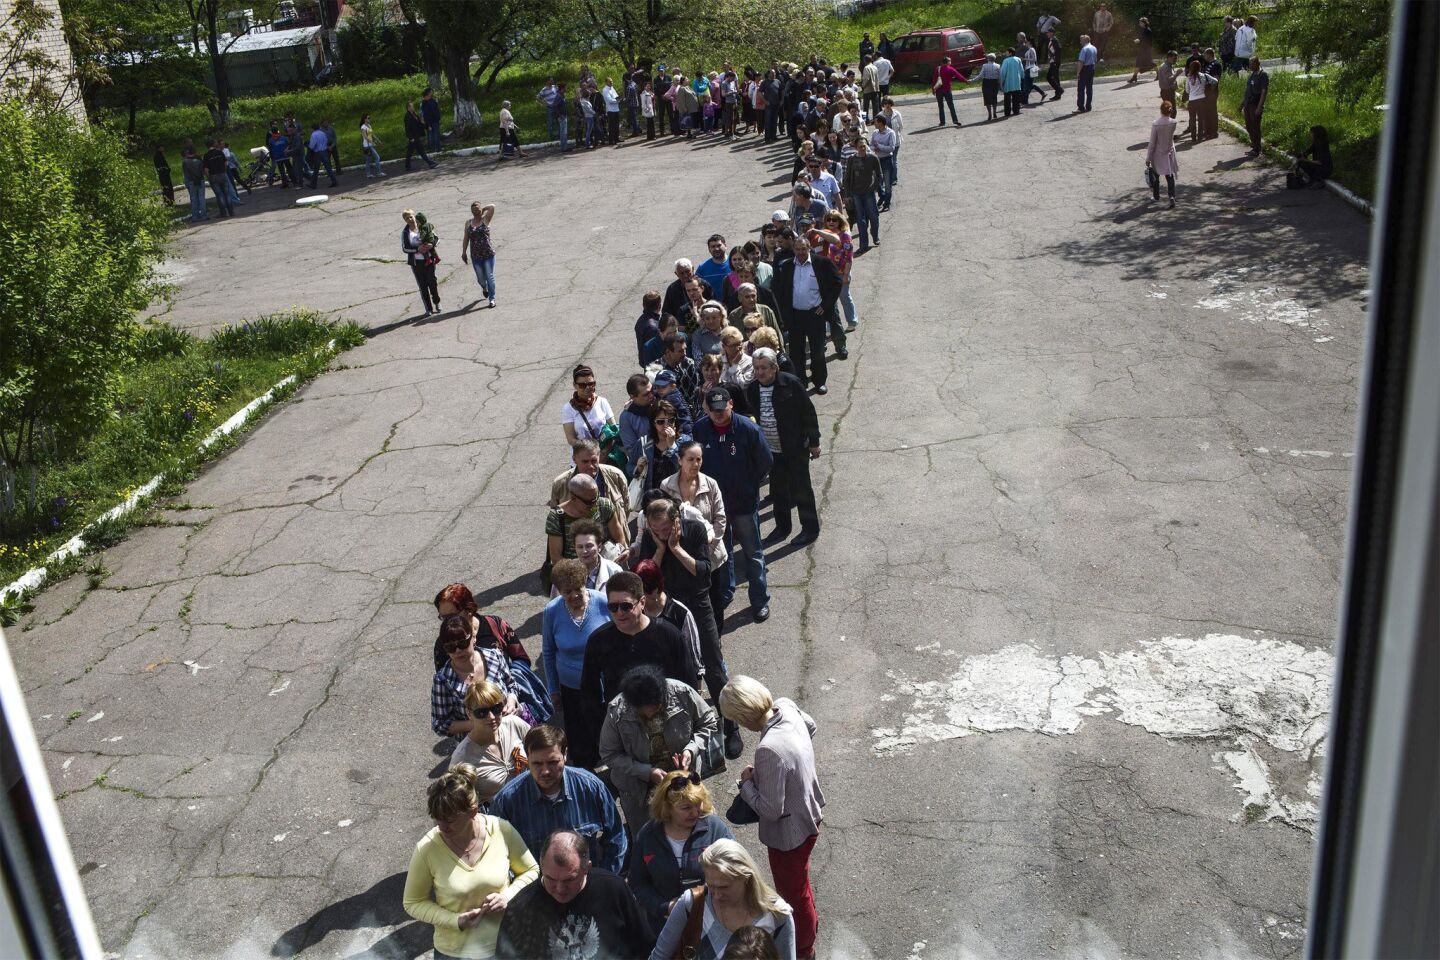 People wait in line in Budennovskiy, Ukraine, to vote in a May 11 referendum conducted by pro-Russian leaders in eastern Ukraine.